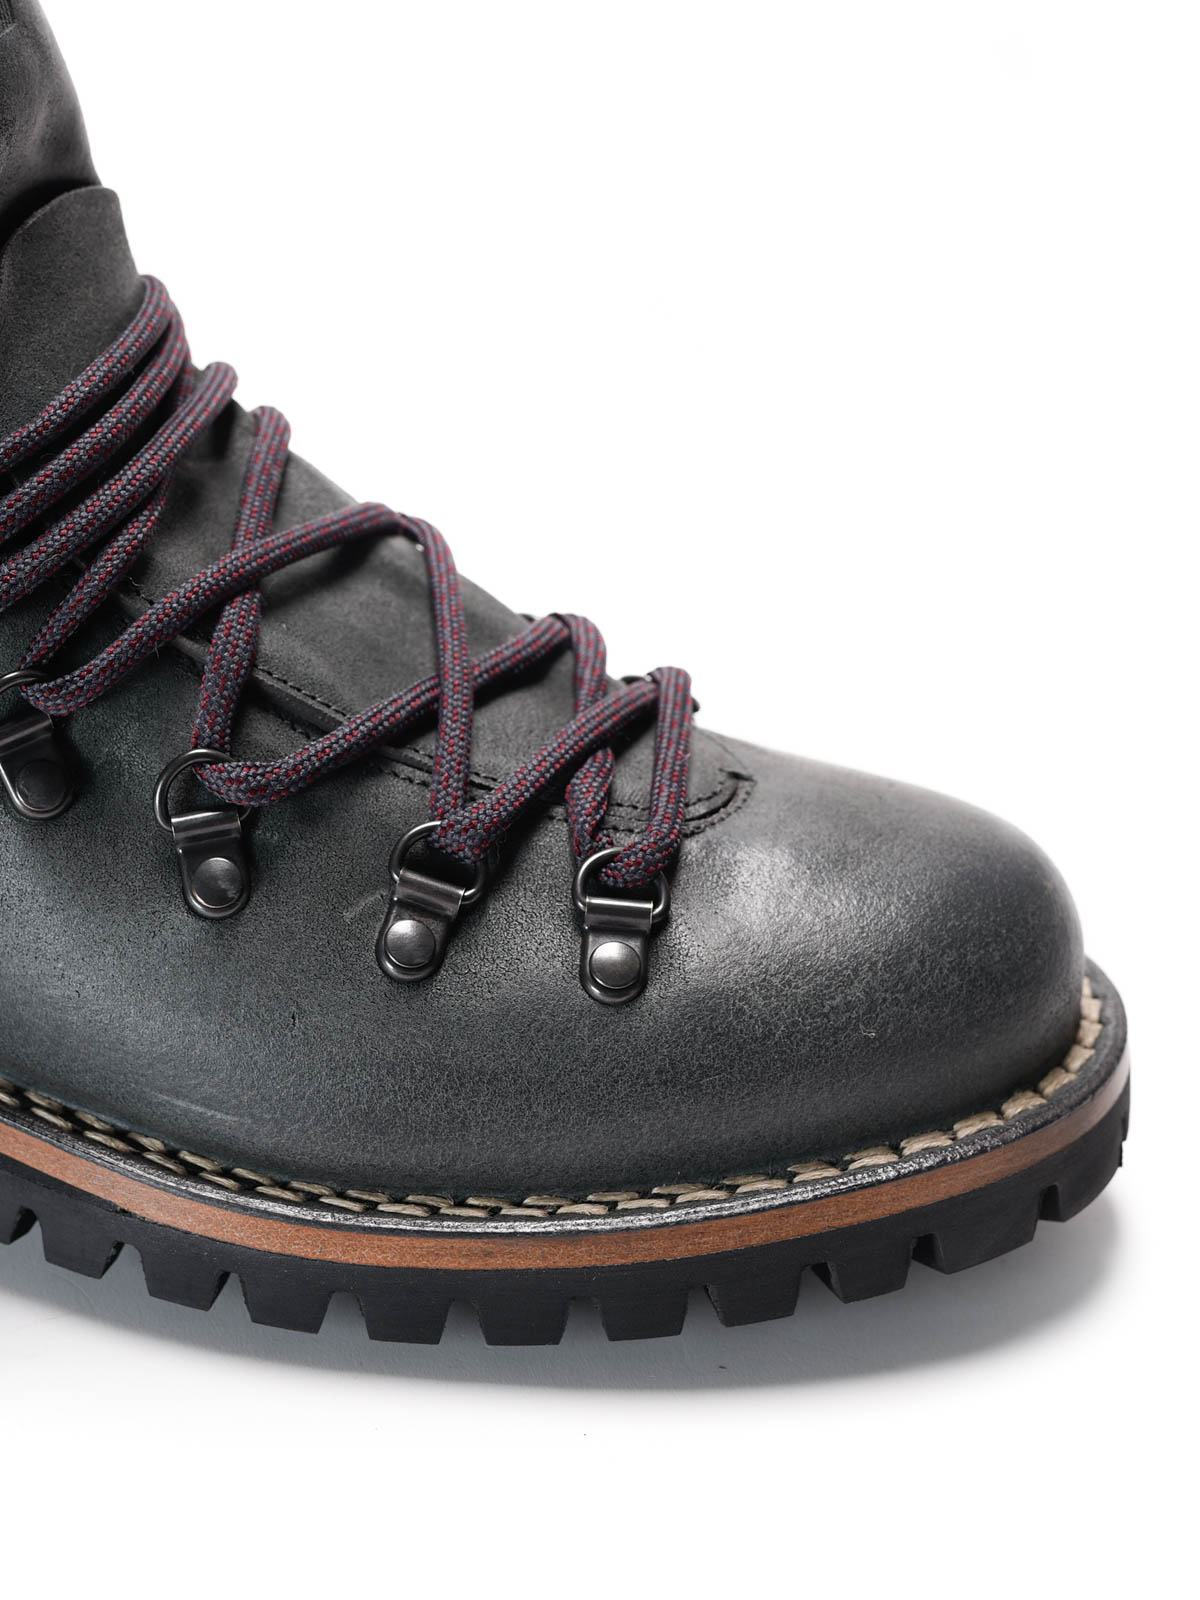 Car Shoe - Leather hiking boots - ankle 